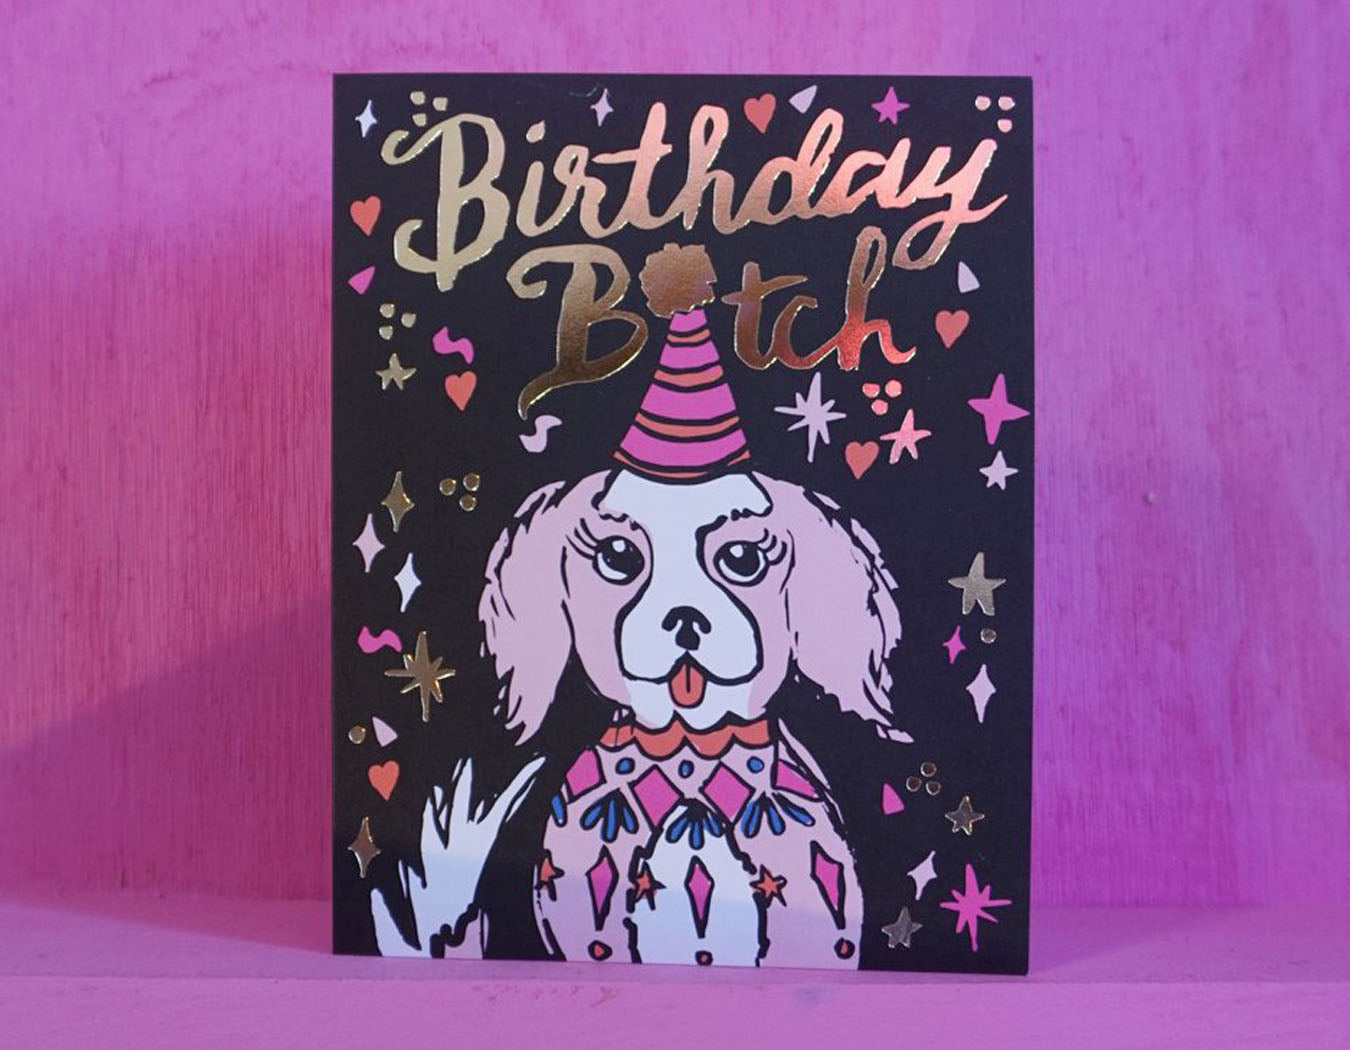 gold foil text reads birthday bitch party sparkles surround happy dog illustration